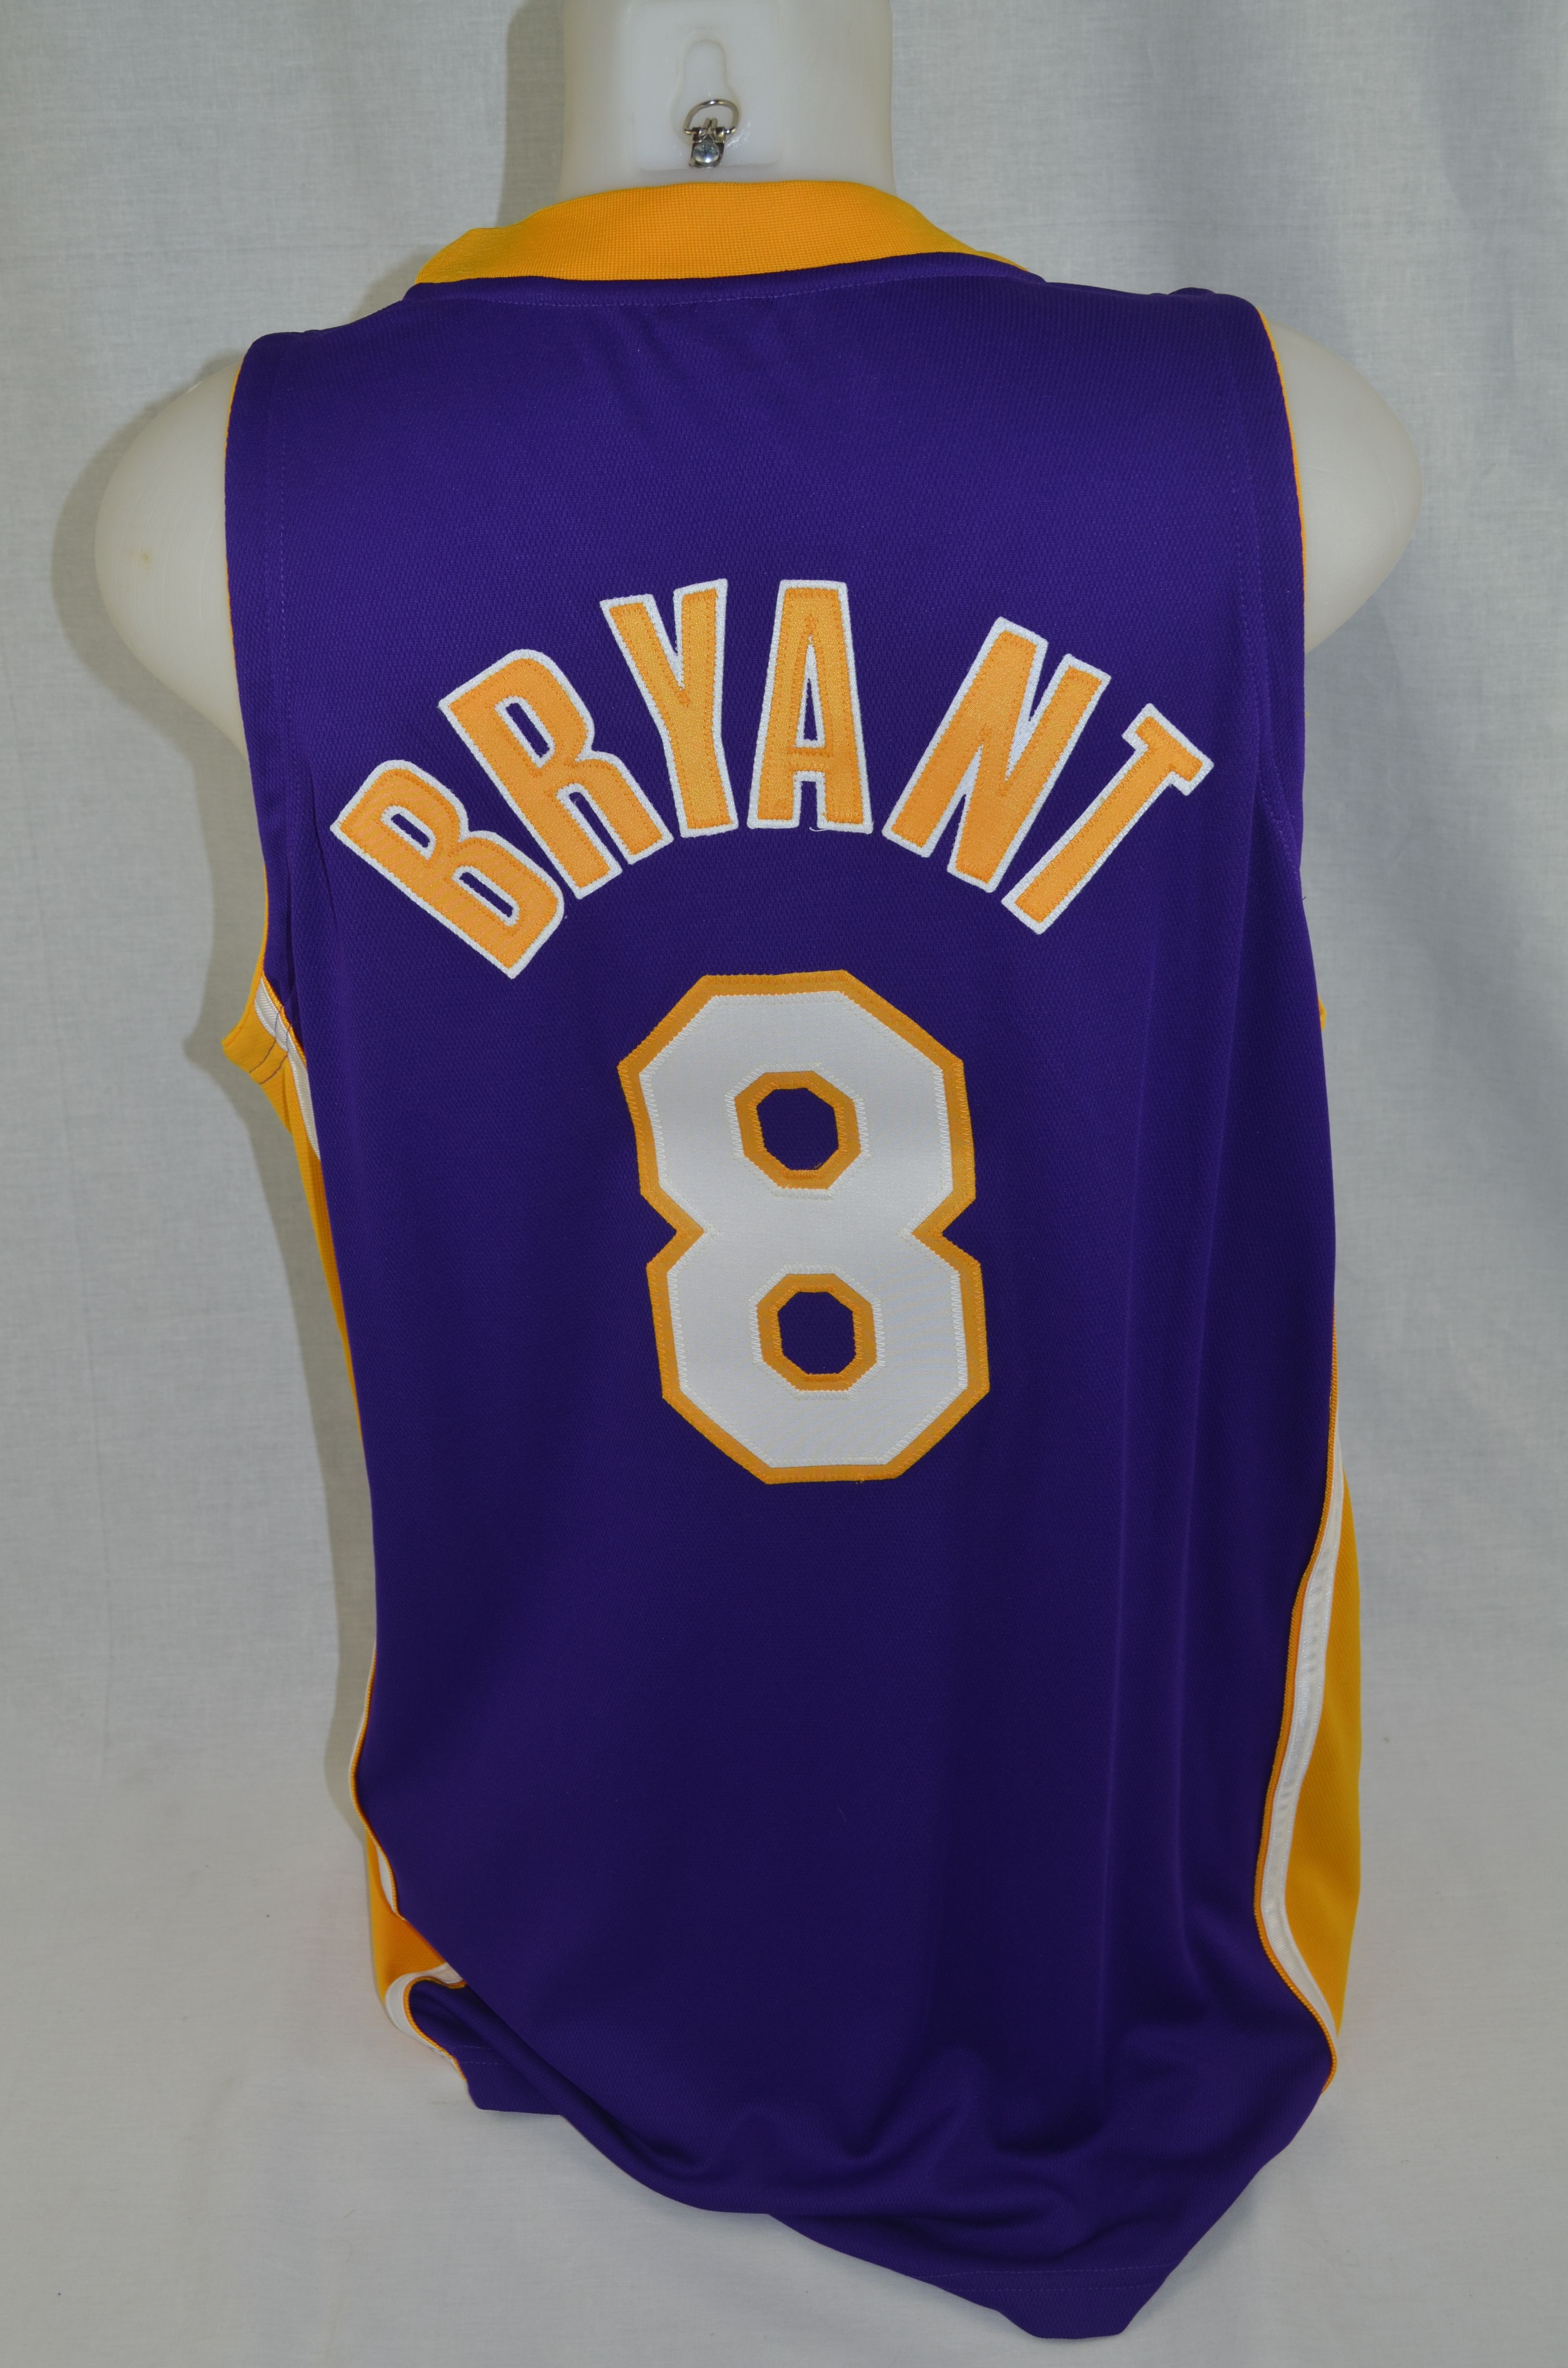 2002 Kobe Bryant Signed UDA Limited Edition Los Angeles Lakers